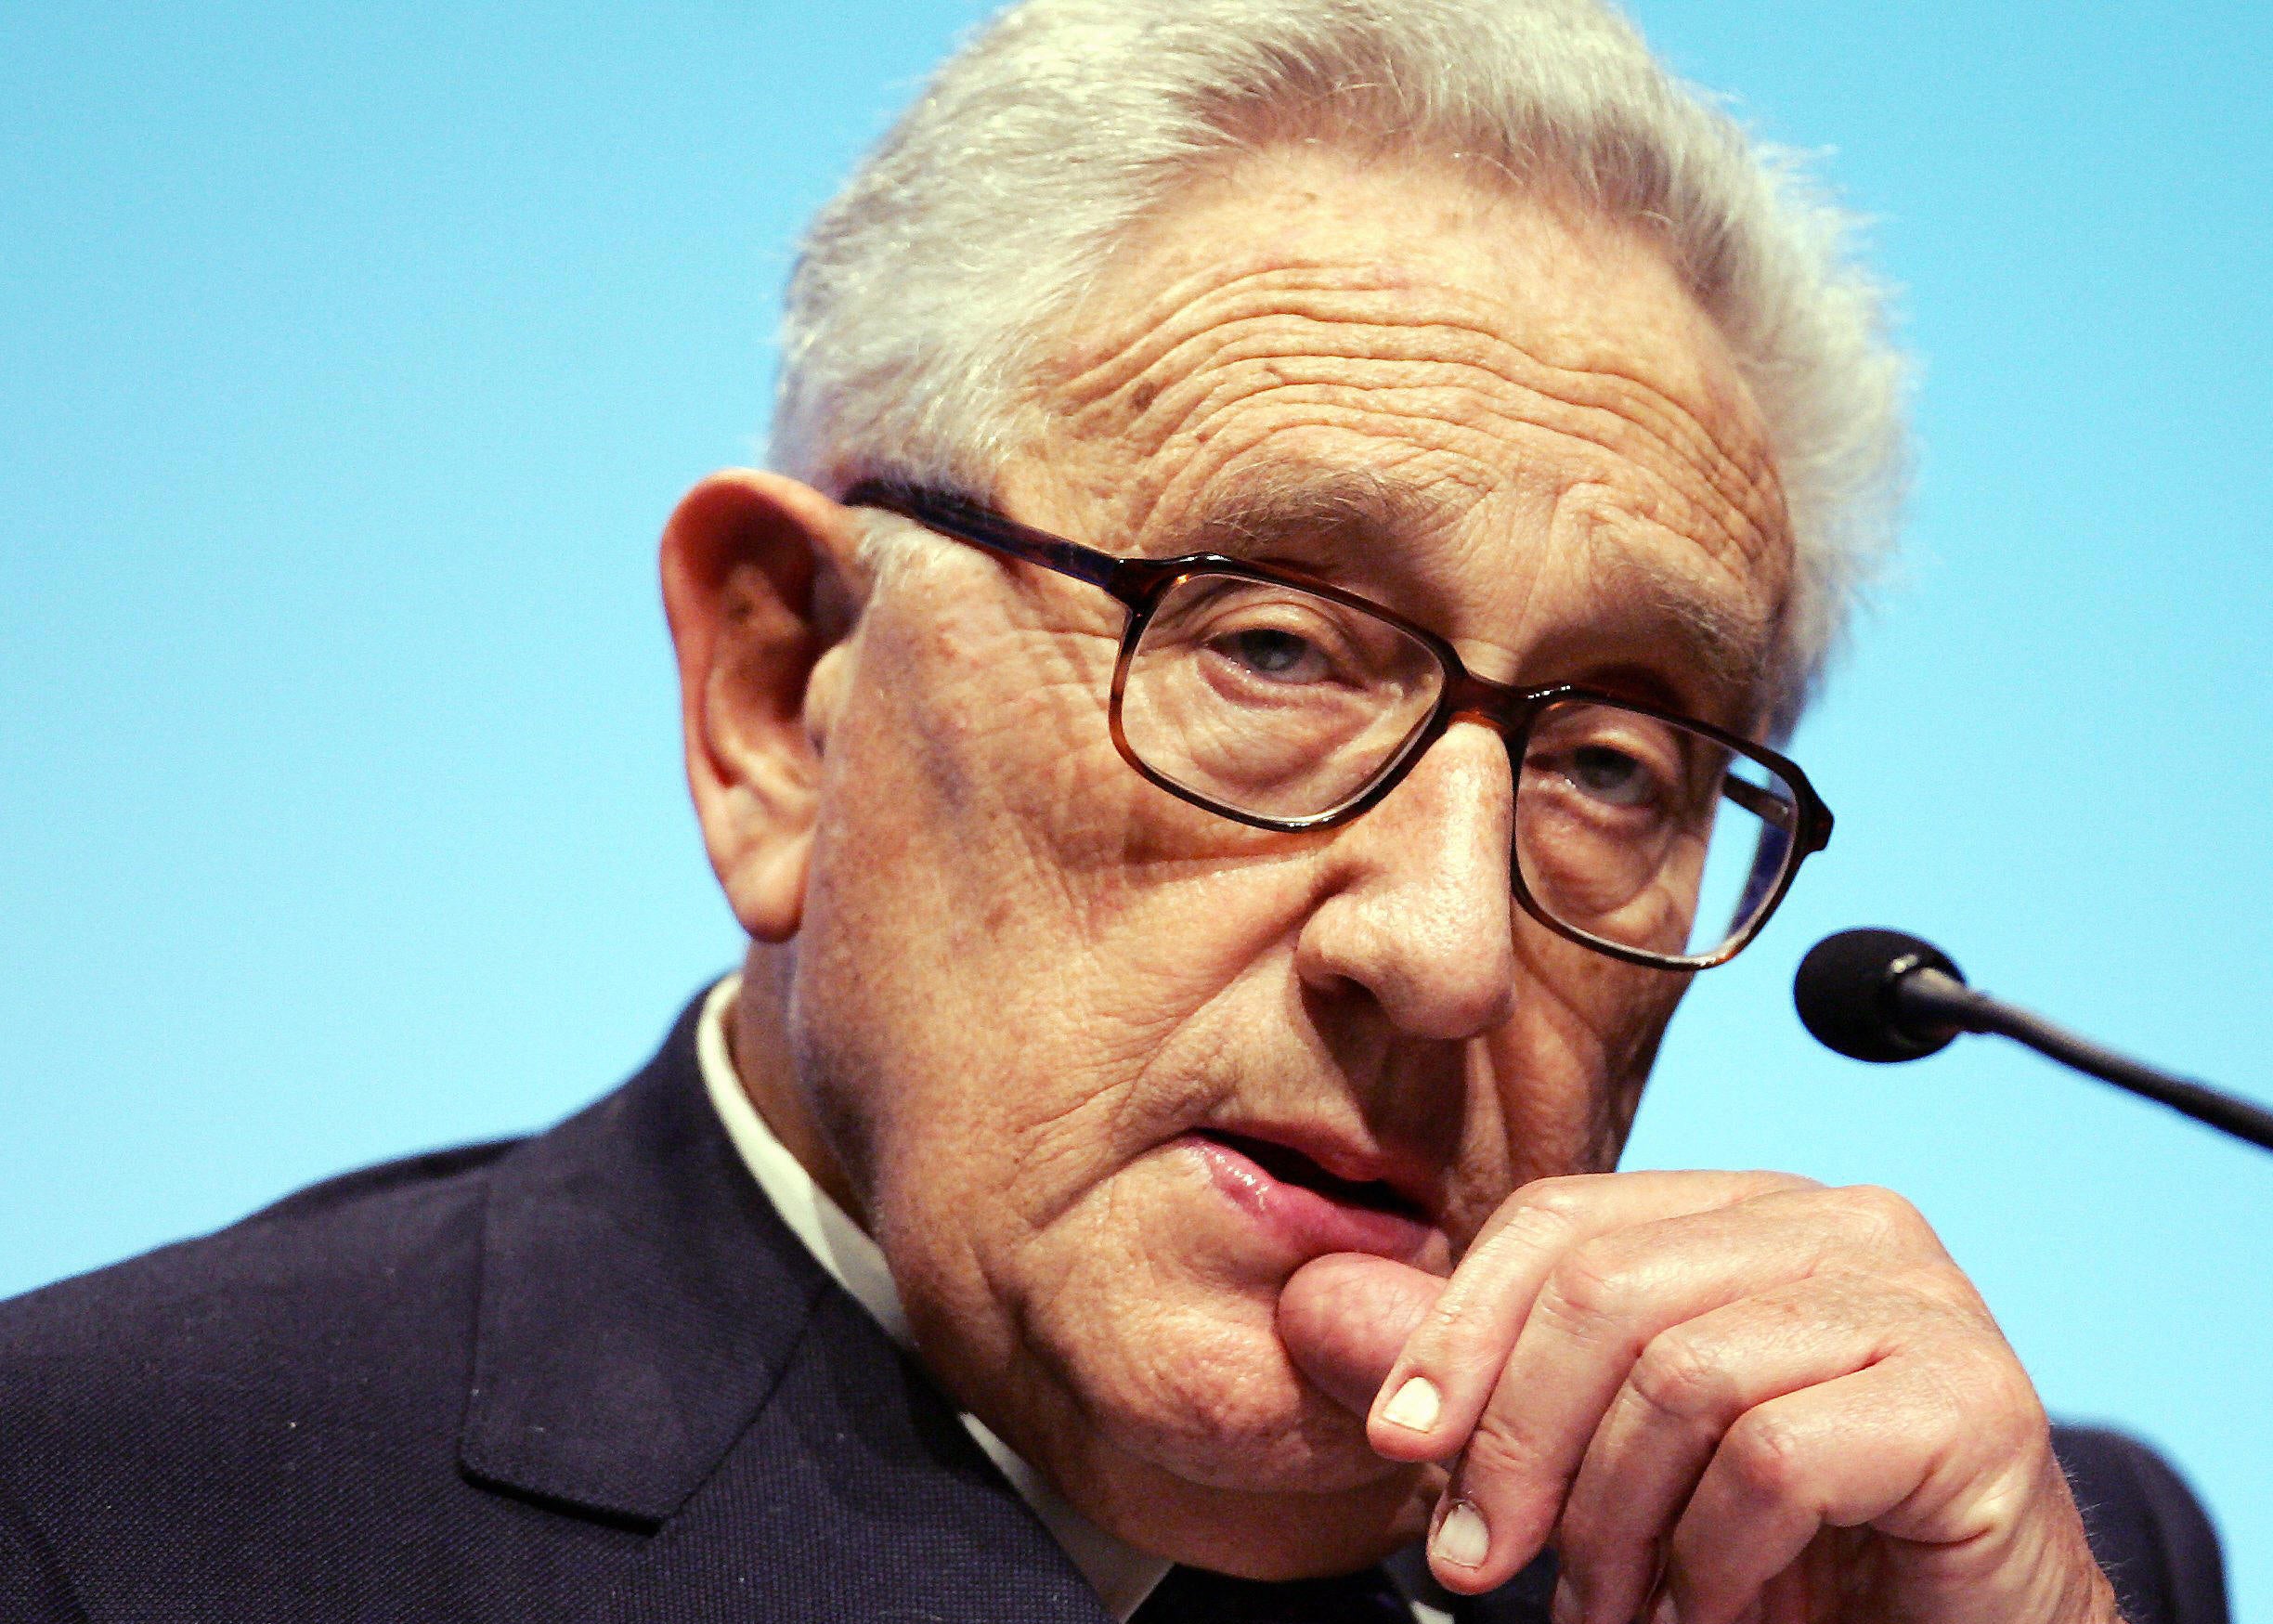 Despite all his faults, Kissinger will be remembered as one of the greatest American diplomats and indeed as the man who made American diplomacy respected worldwide